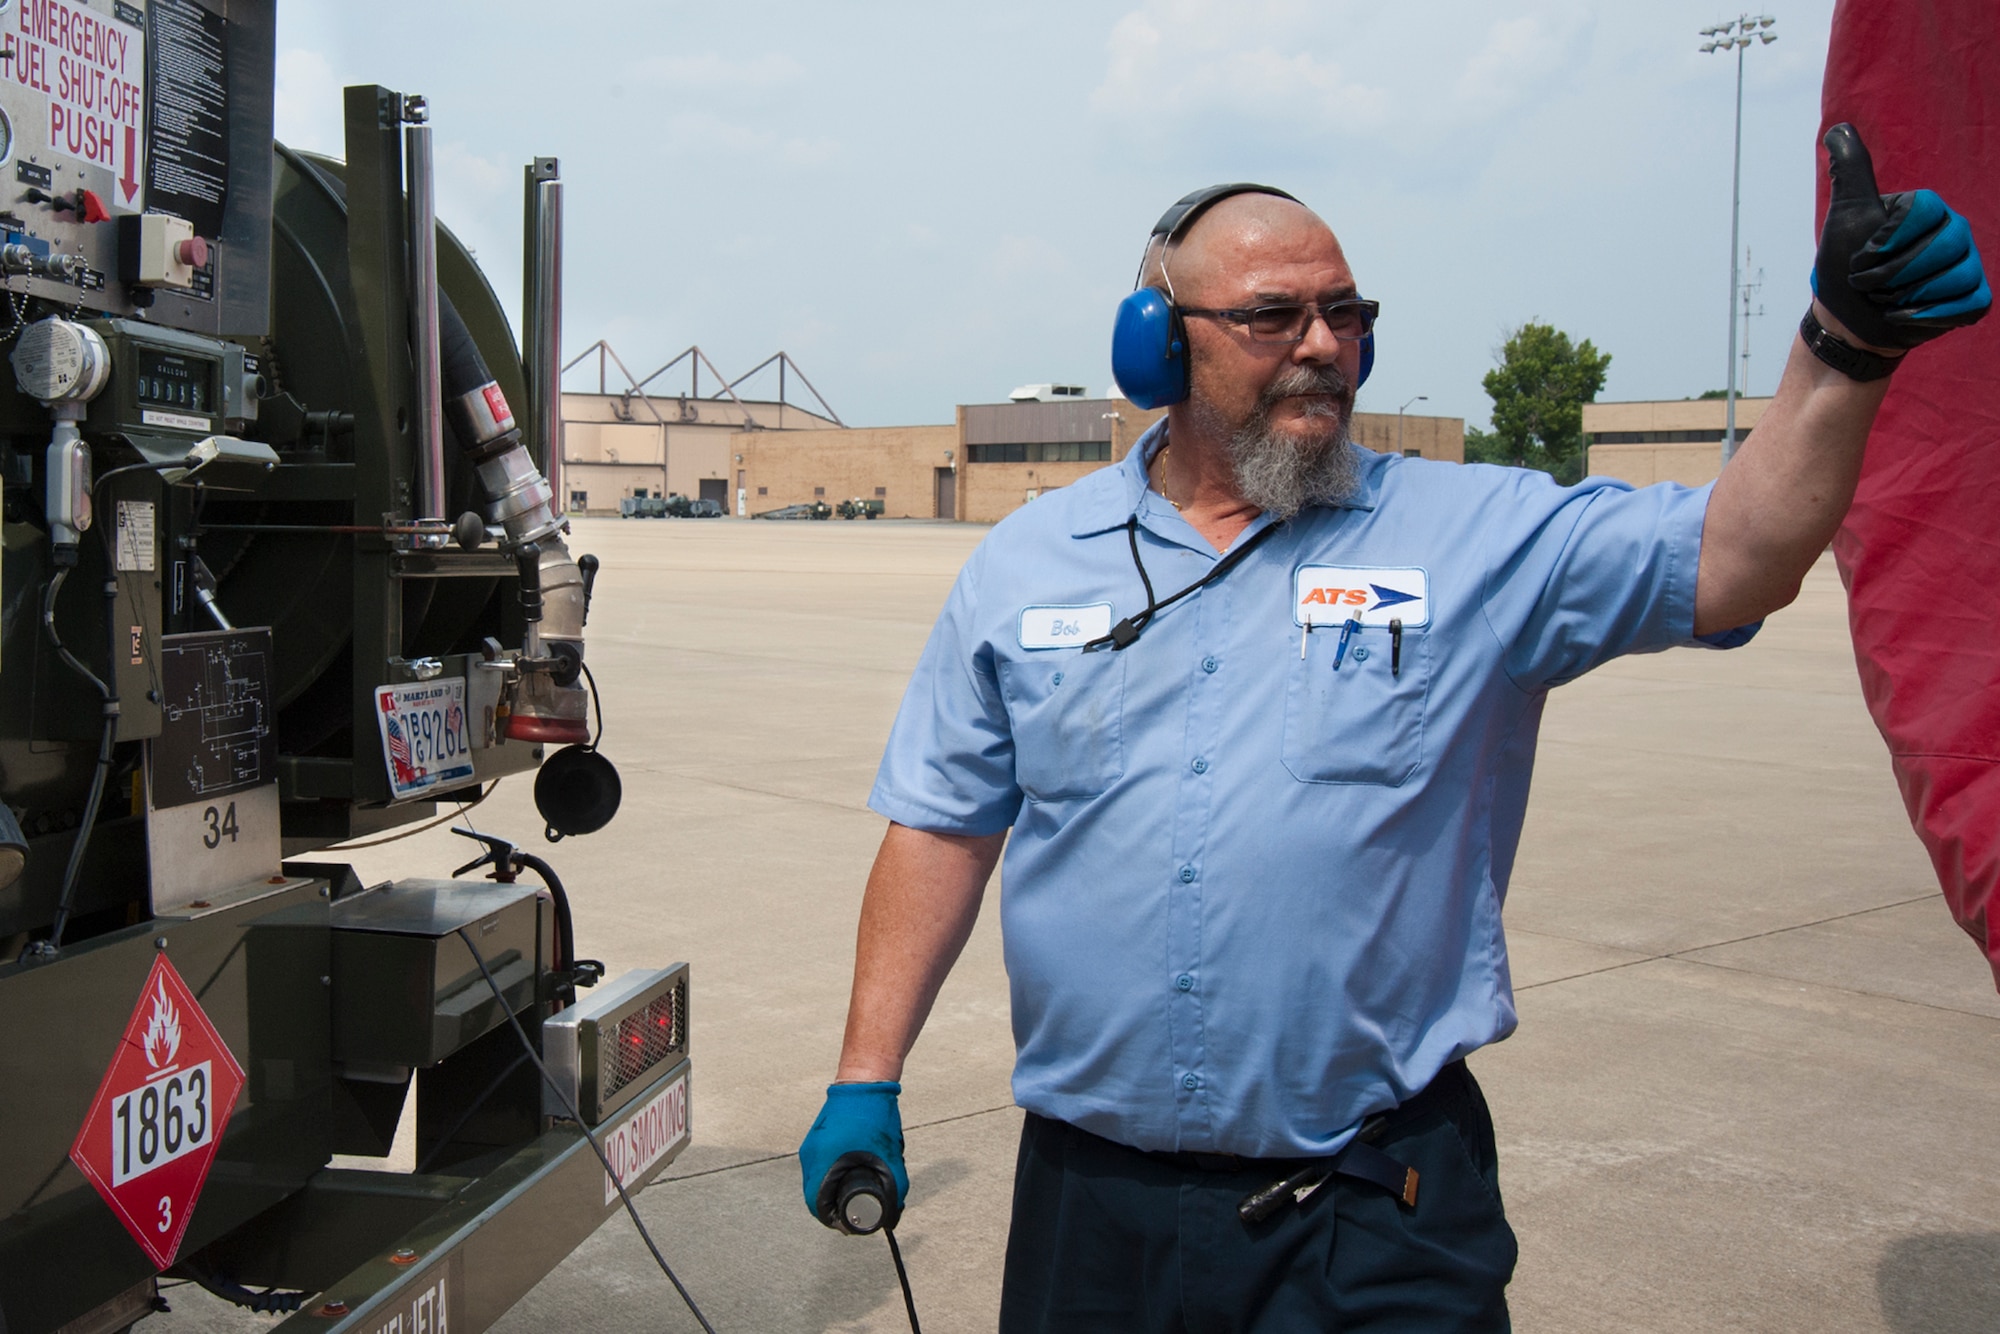 Bob Taylor, Akima Technical Solutions fuel distribution systems operator, gives the thumbs up to start refueling a 459th Air Refueling Wing KC-135R Stratotanker on the Joint Base Andrews, Maryland, flight line July 20, 2017. The KC-135 is refueled using a truck equipped with a hydraulic system to draw fuel from an underground reservoir onto the aircraft. (U.S Air Force photo/Tech. Sgt. Kat Justen)